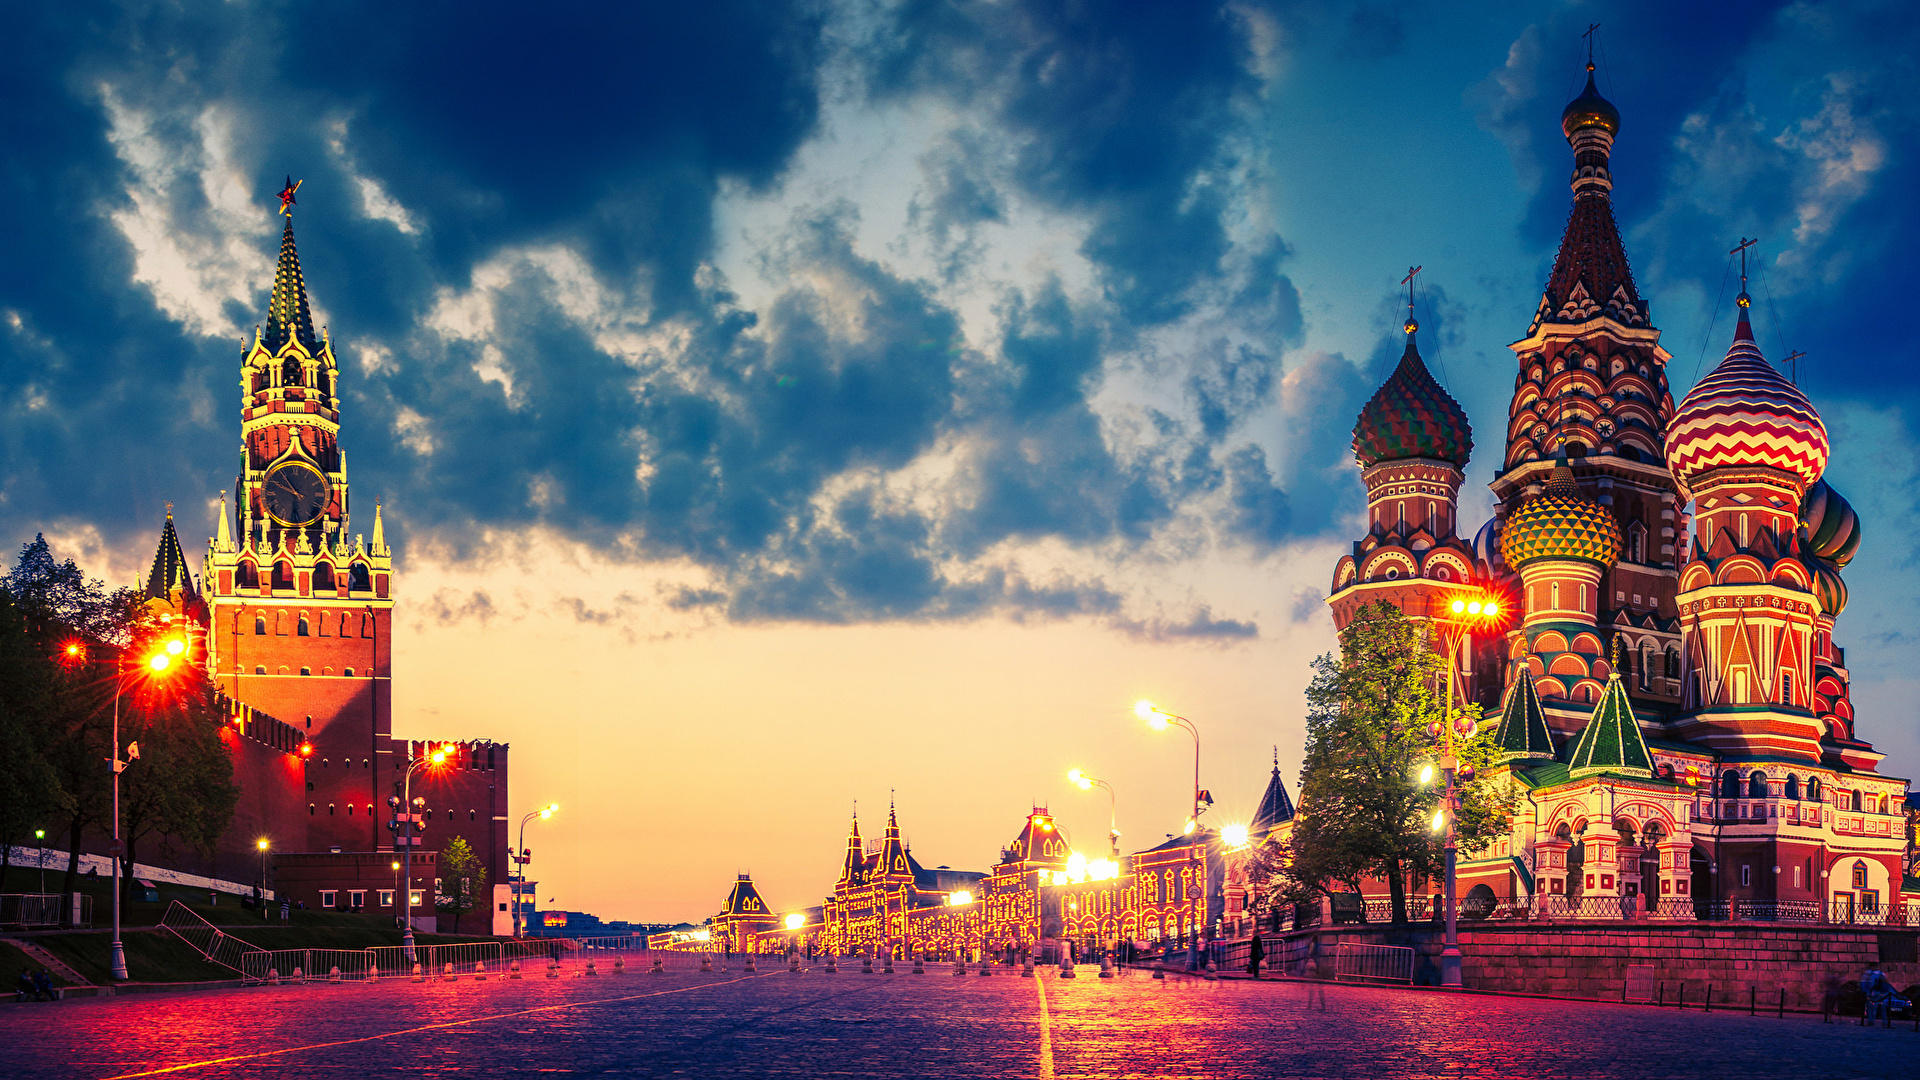 Moscow: The Red Square is home to St. Basil's Cathedral and the State Historical Museum. 1920x1080 Full HD Wallpaper.